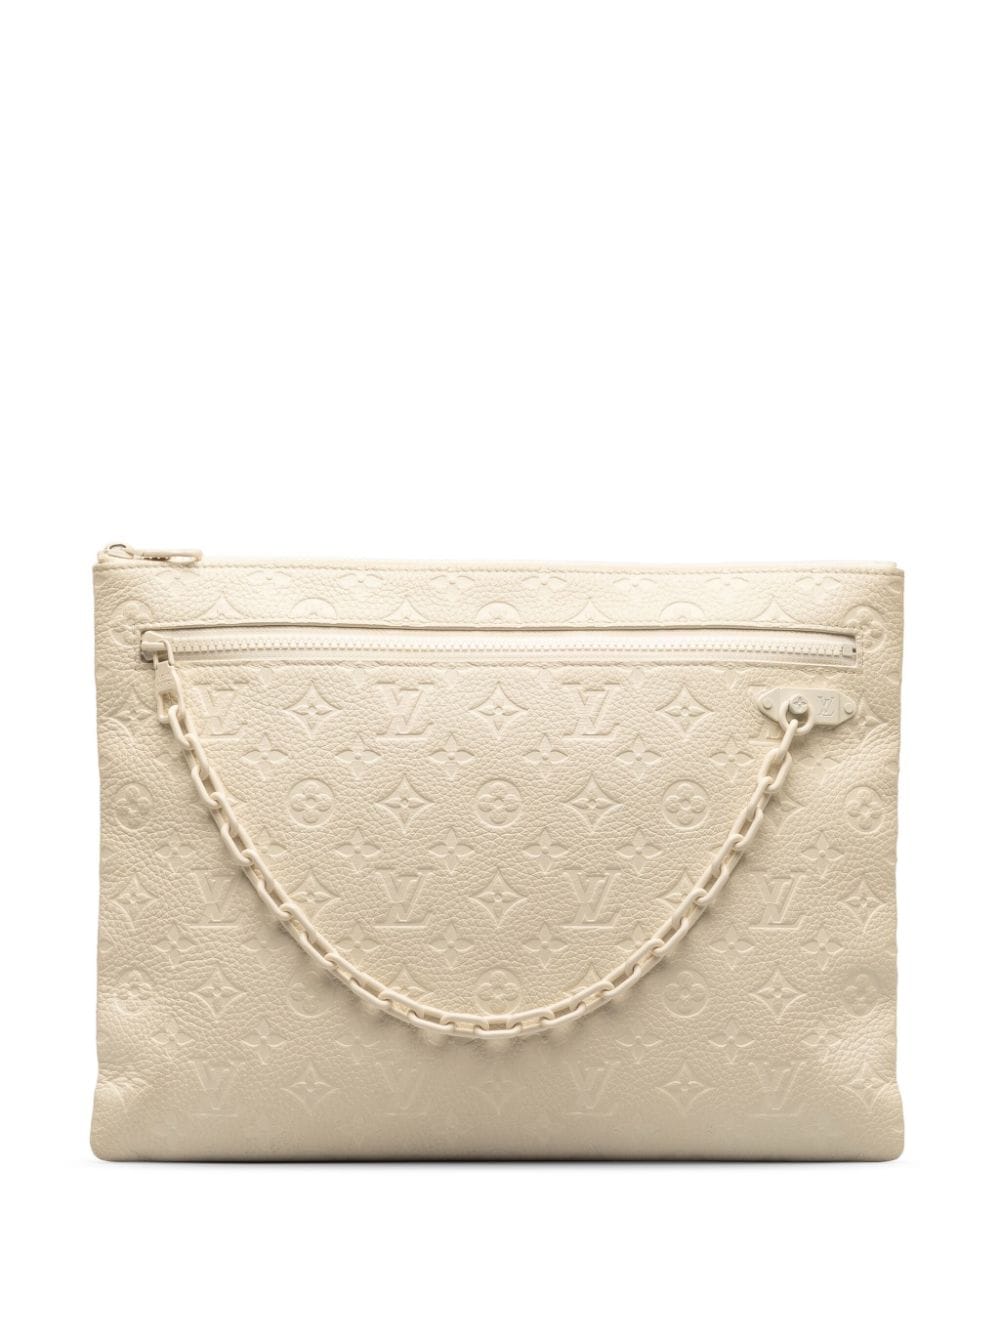 Pre-owned Louis Vuitton 2018 Taurillon A4 Pouch Clutch Bag In White